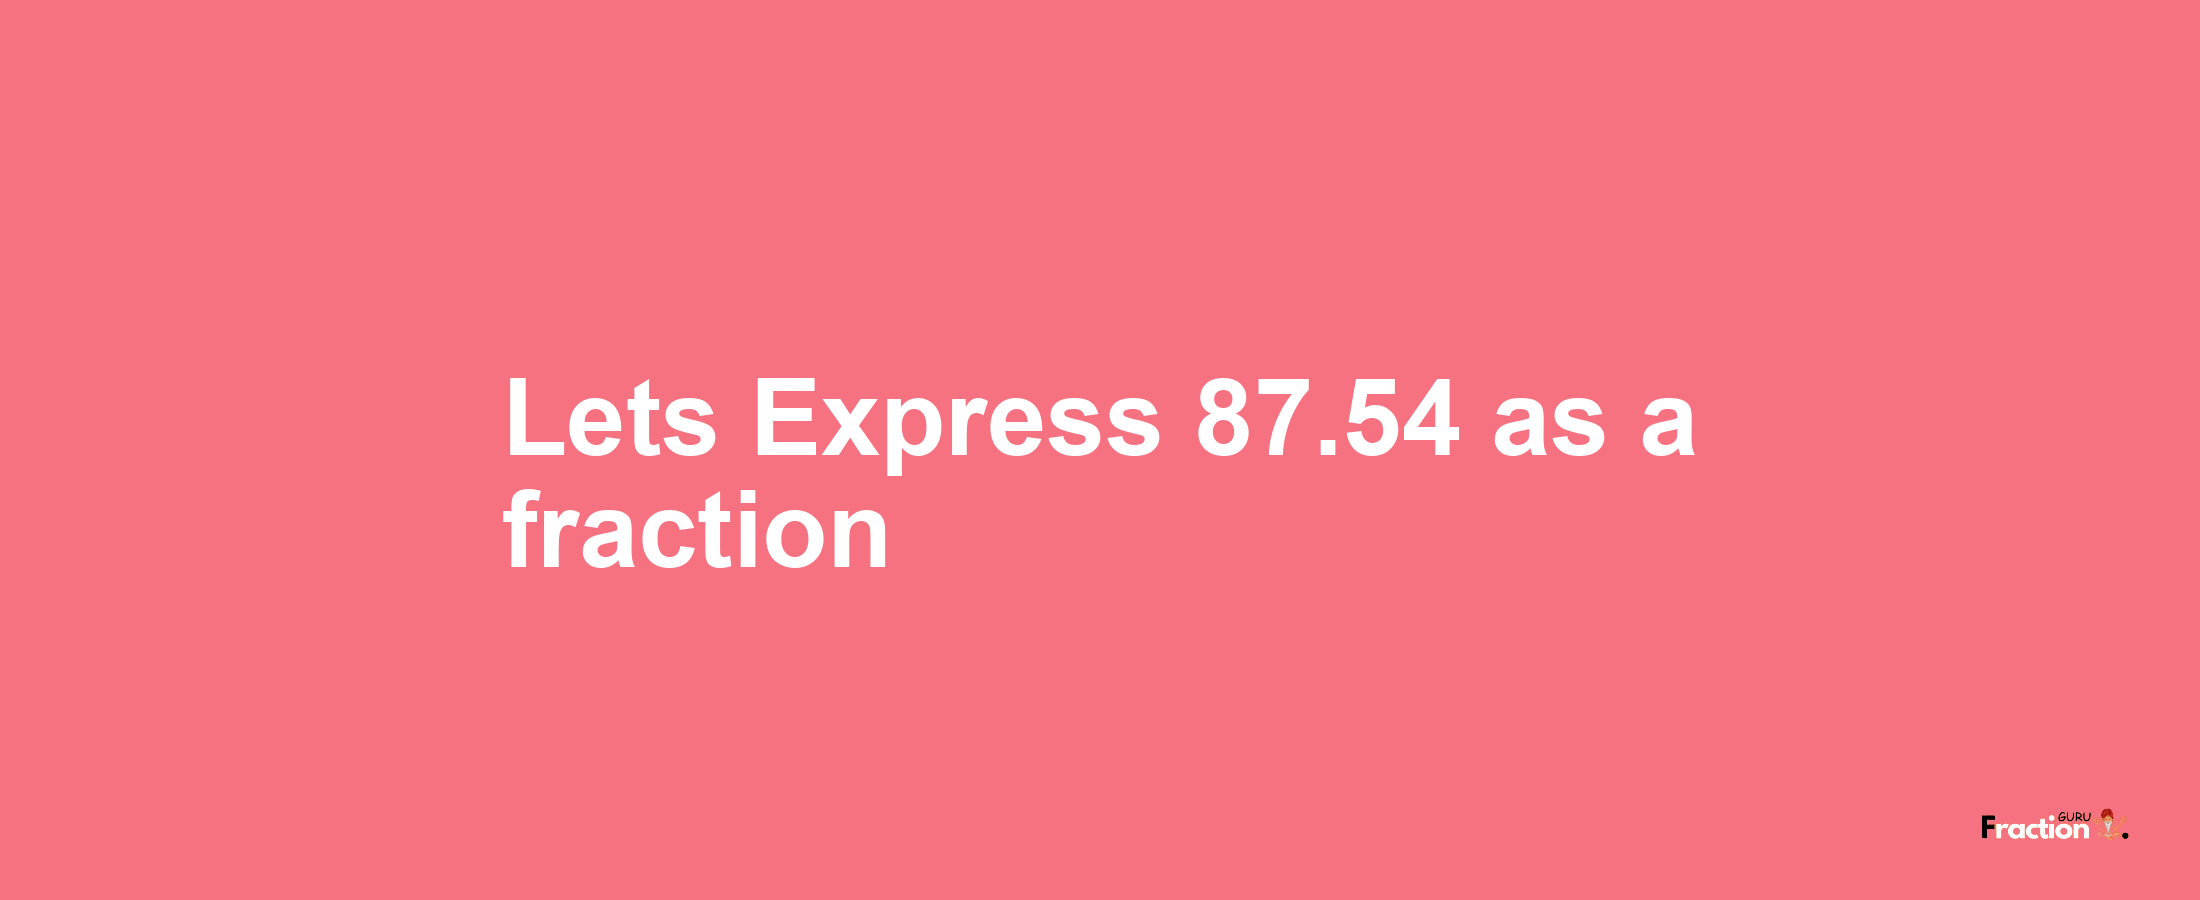 Lets Express 87.54 as afraction